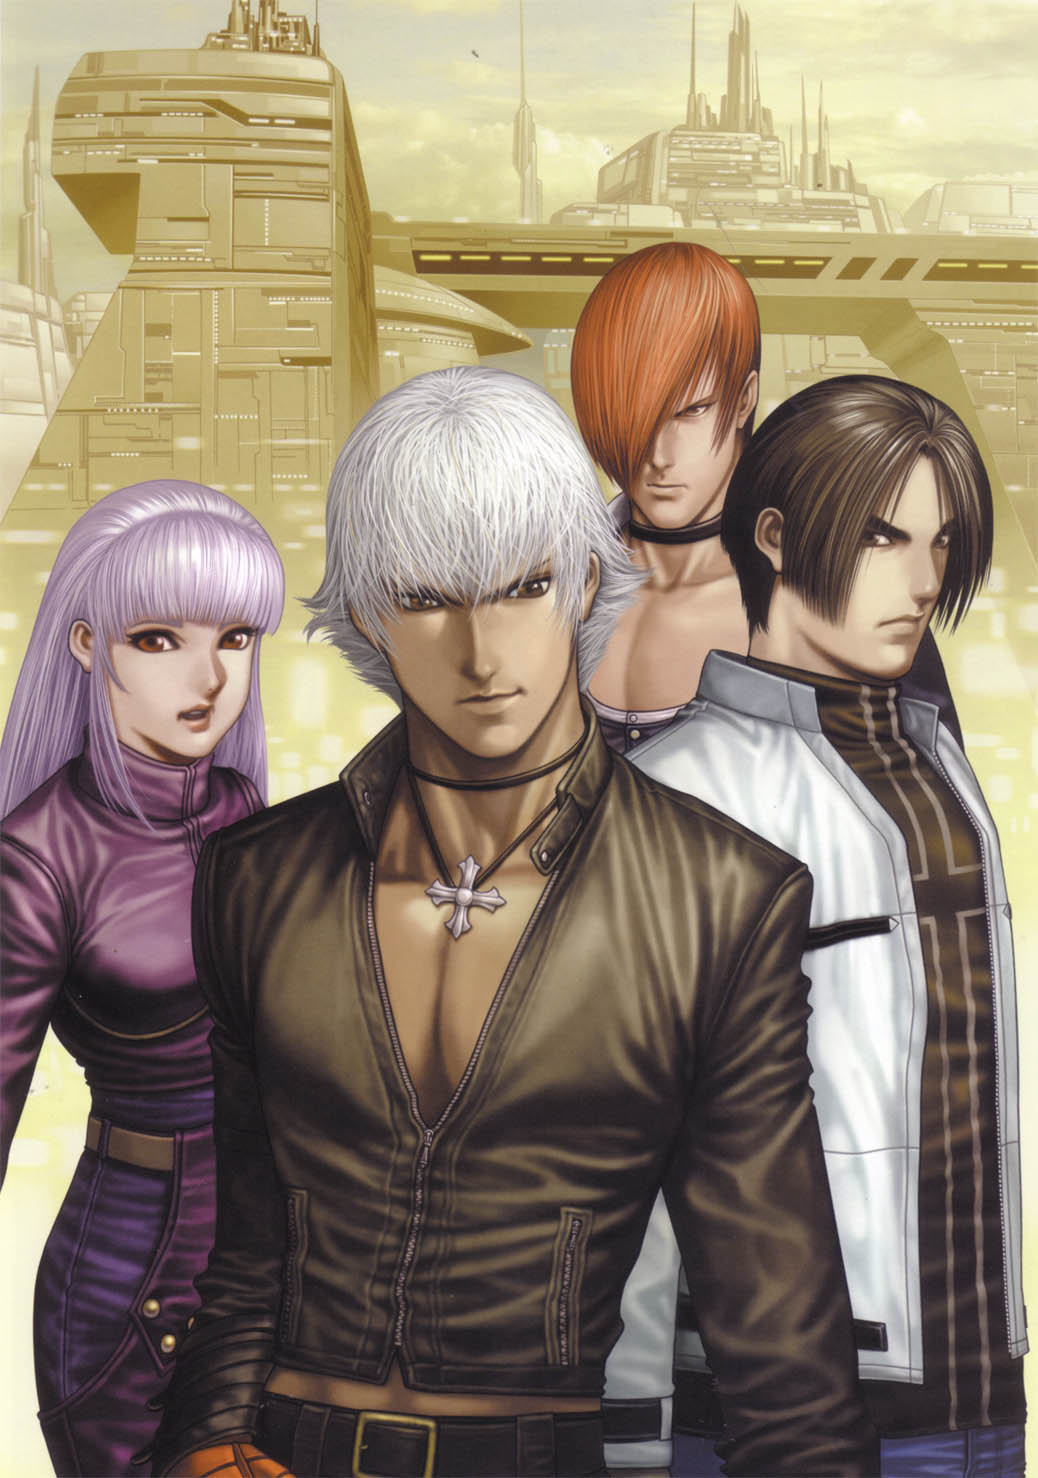 The King Of Fighters 2003 Volume 4 by Wing Yan